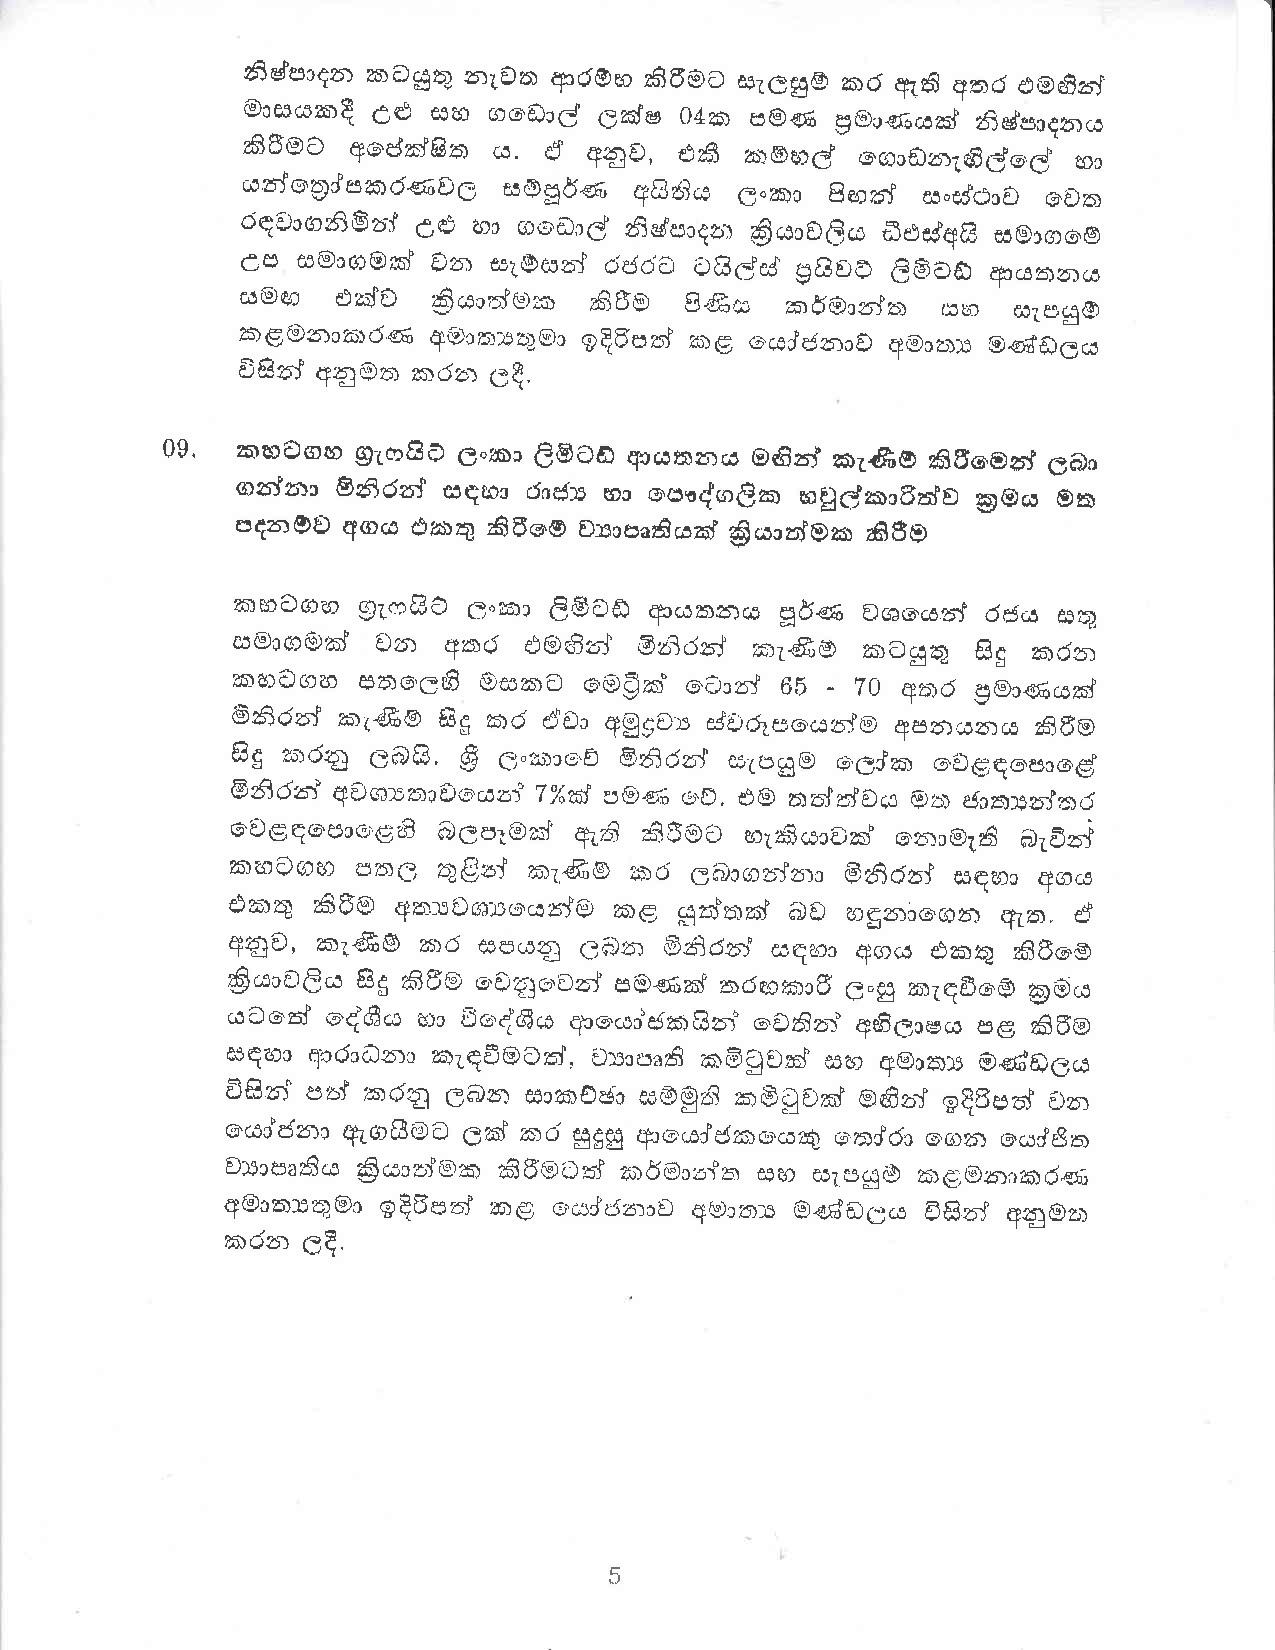 Cabinet Decision on 05.02.2020 page 005